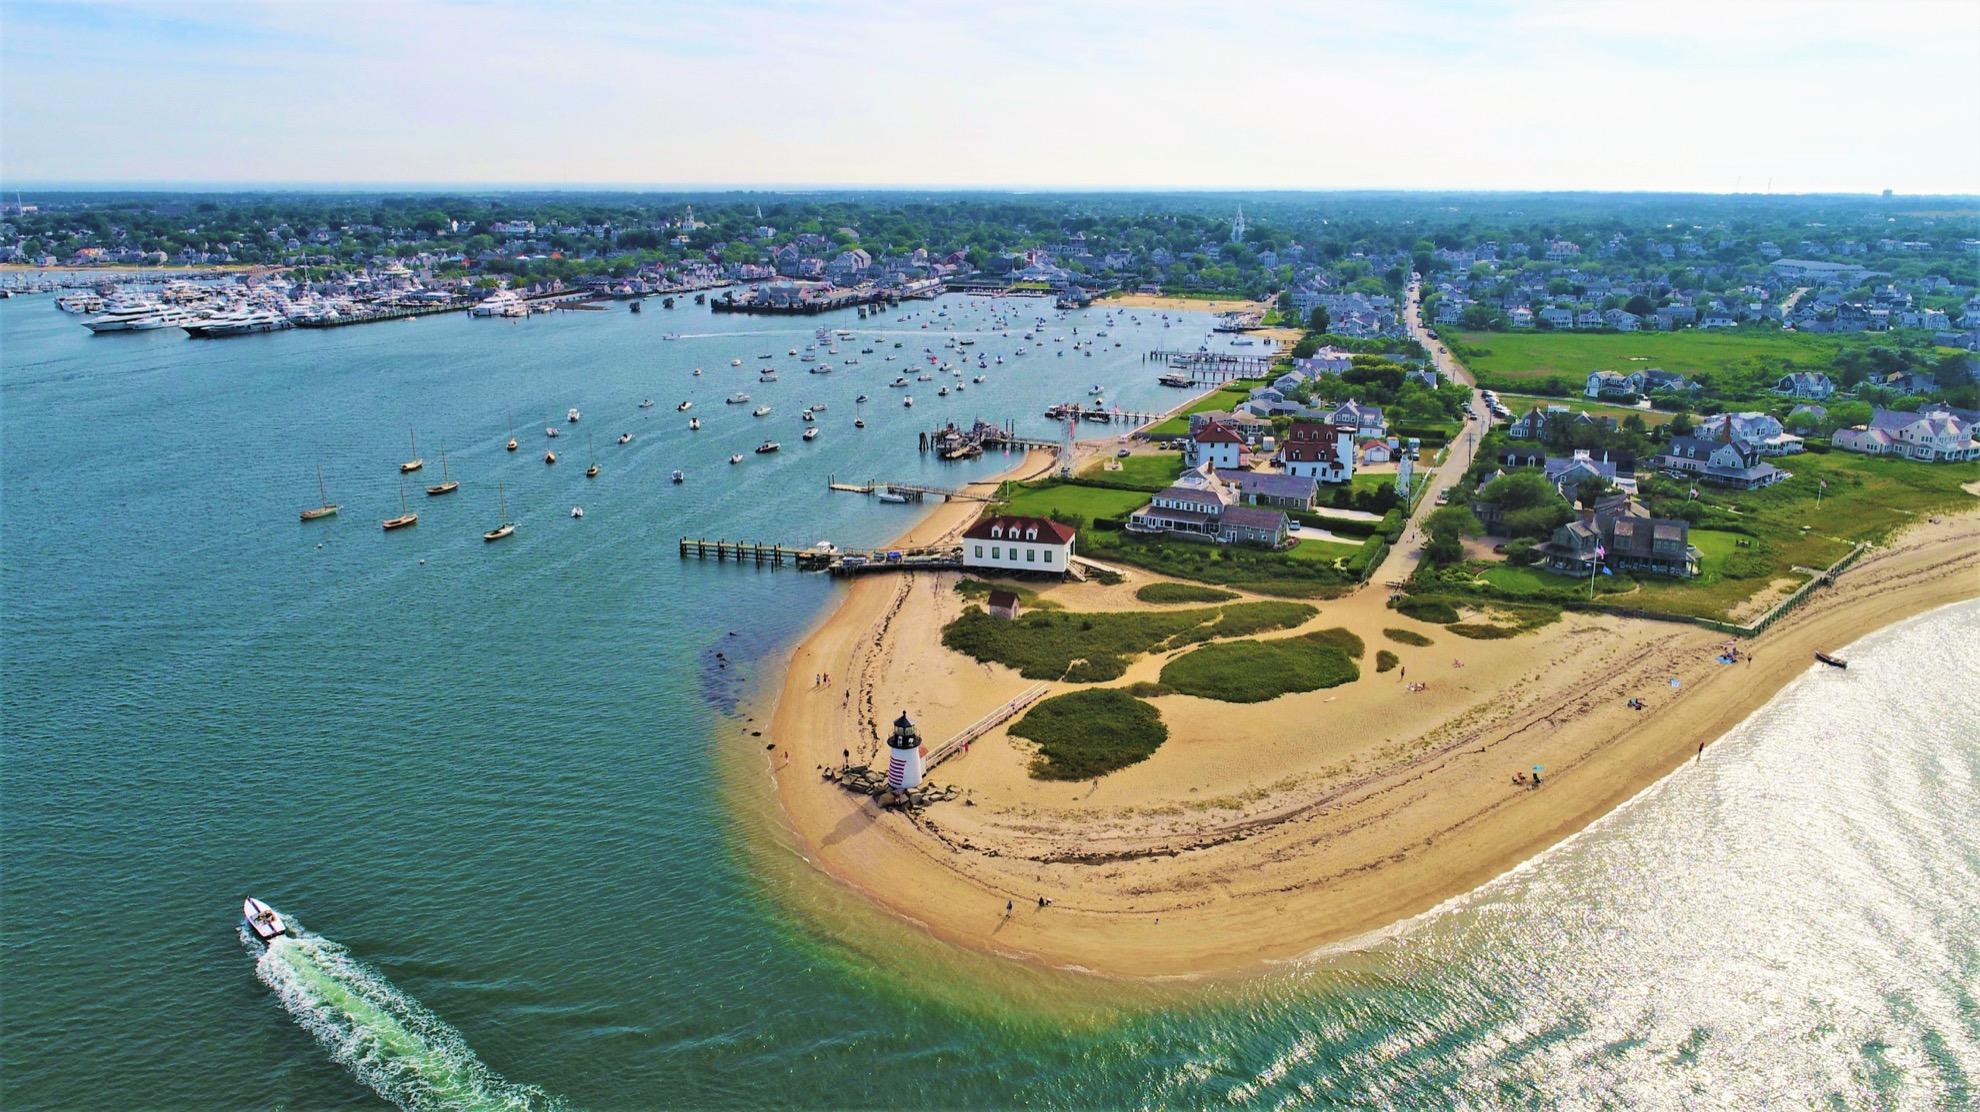 Aerial view of Nantucket.